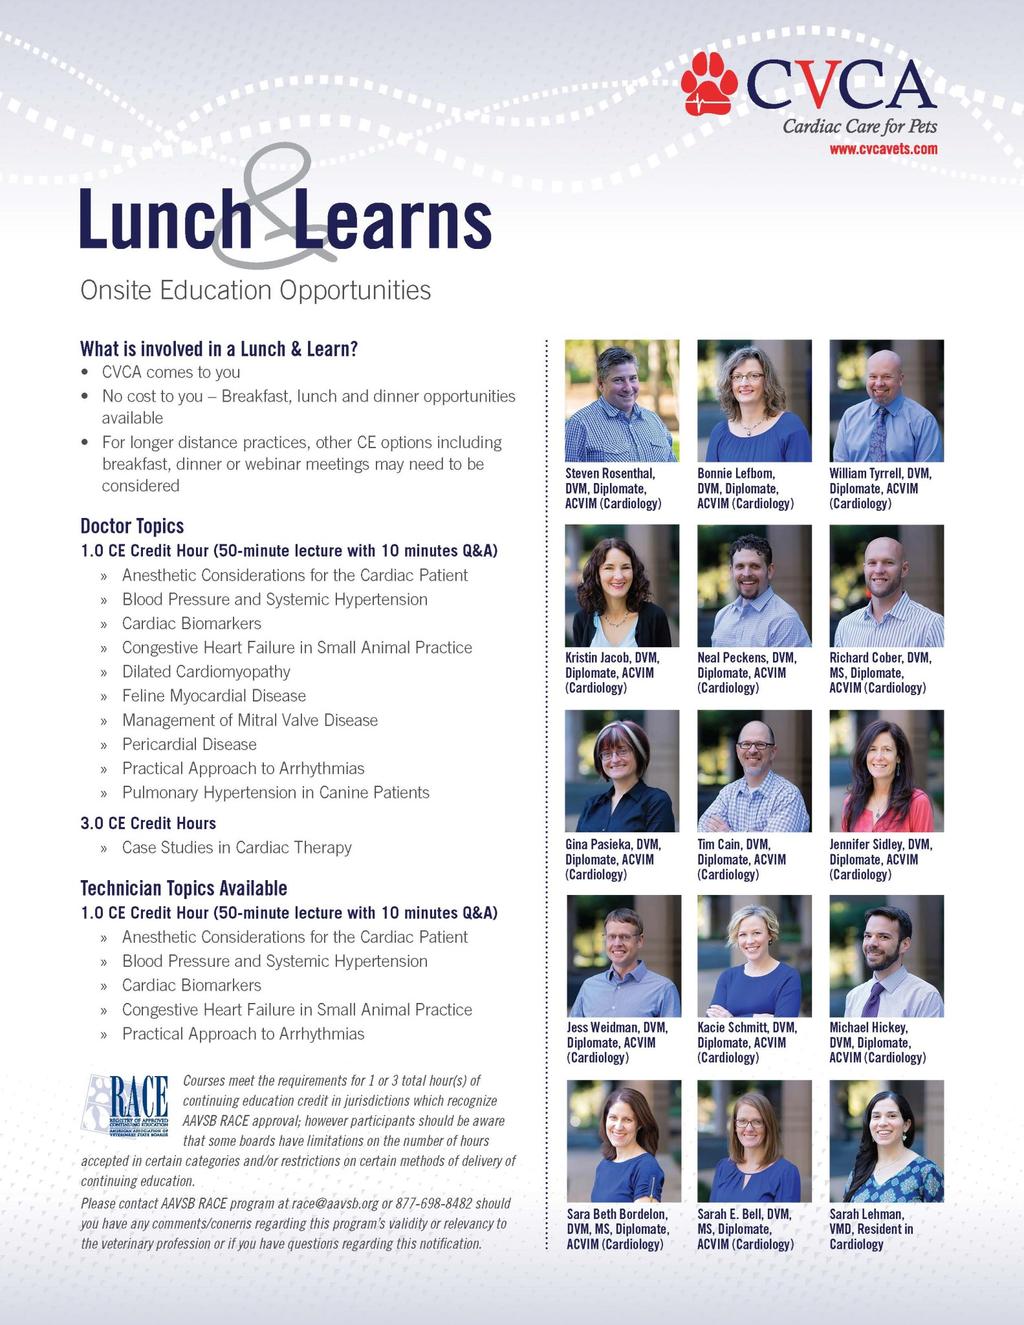 Breakfast & Learns and Lunch & Learns Did you know CVCA offers morning or midday CE education opportunities at your practice (we bring the food too!).